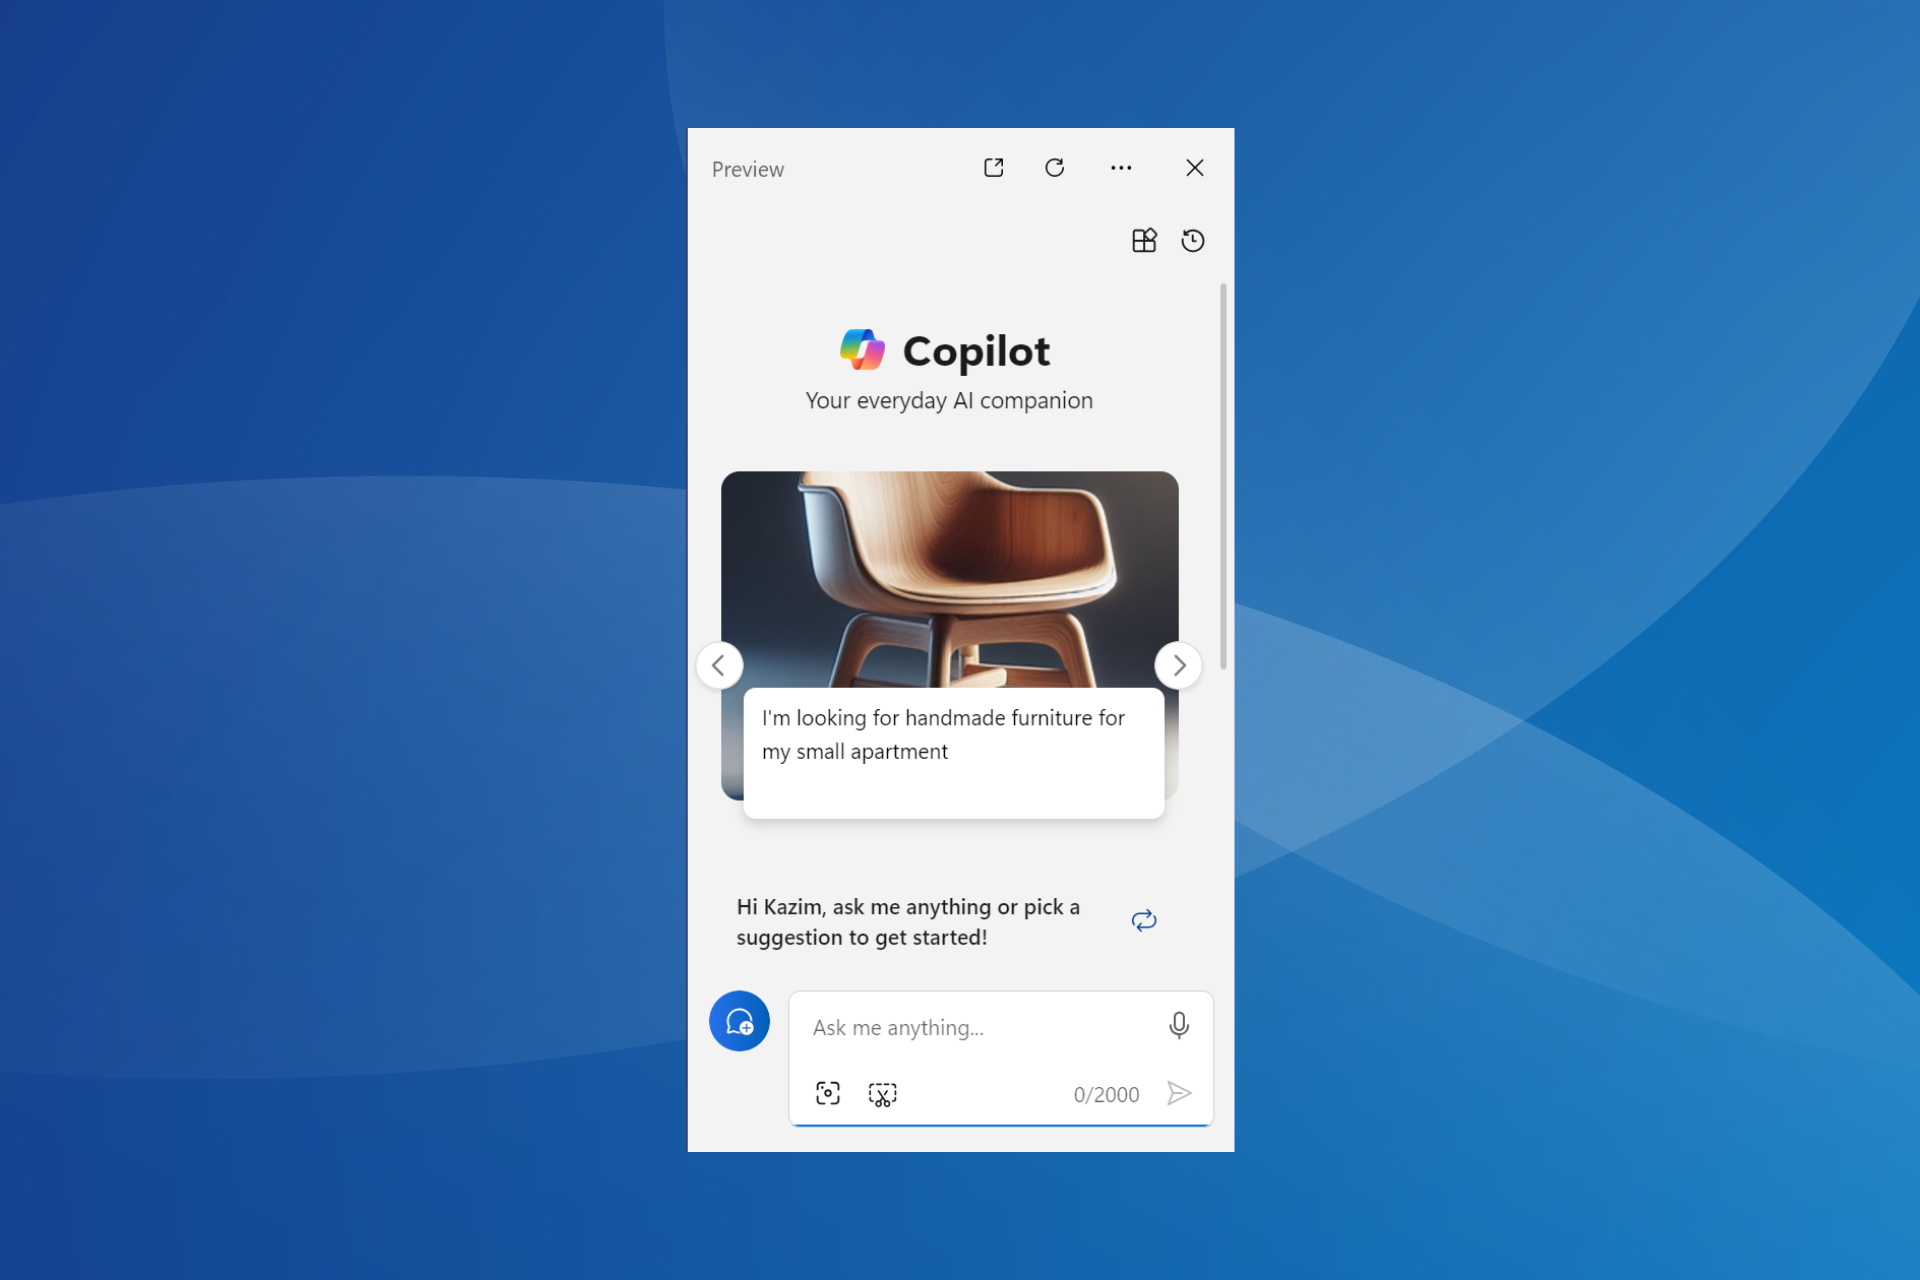 copilol opens when you swipe right on touch devices on Windows 11